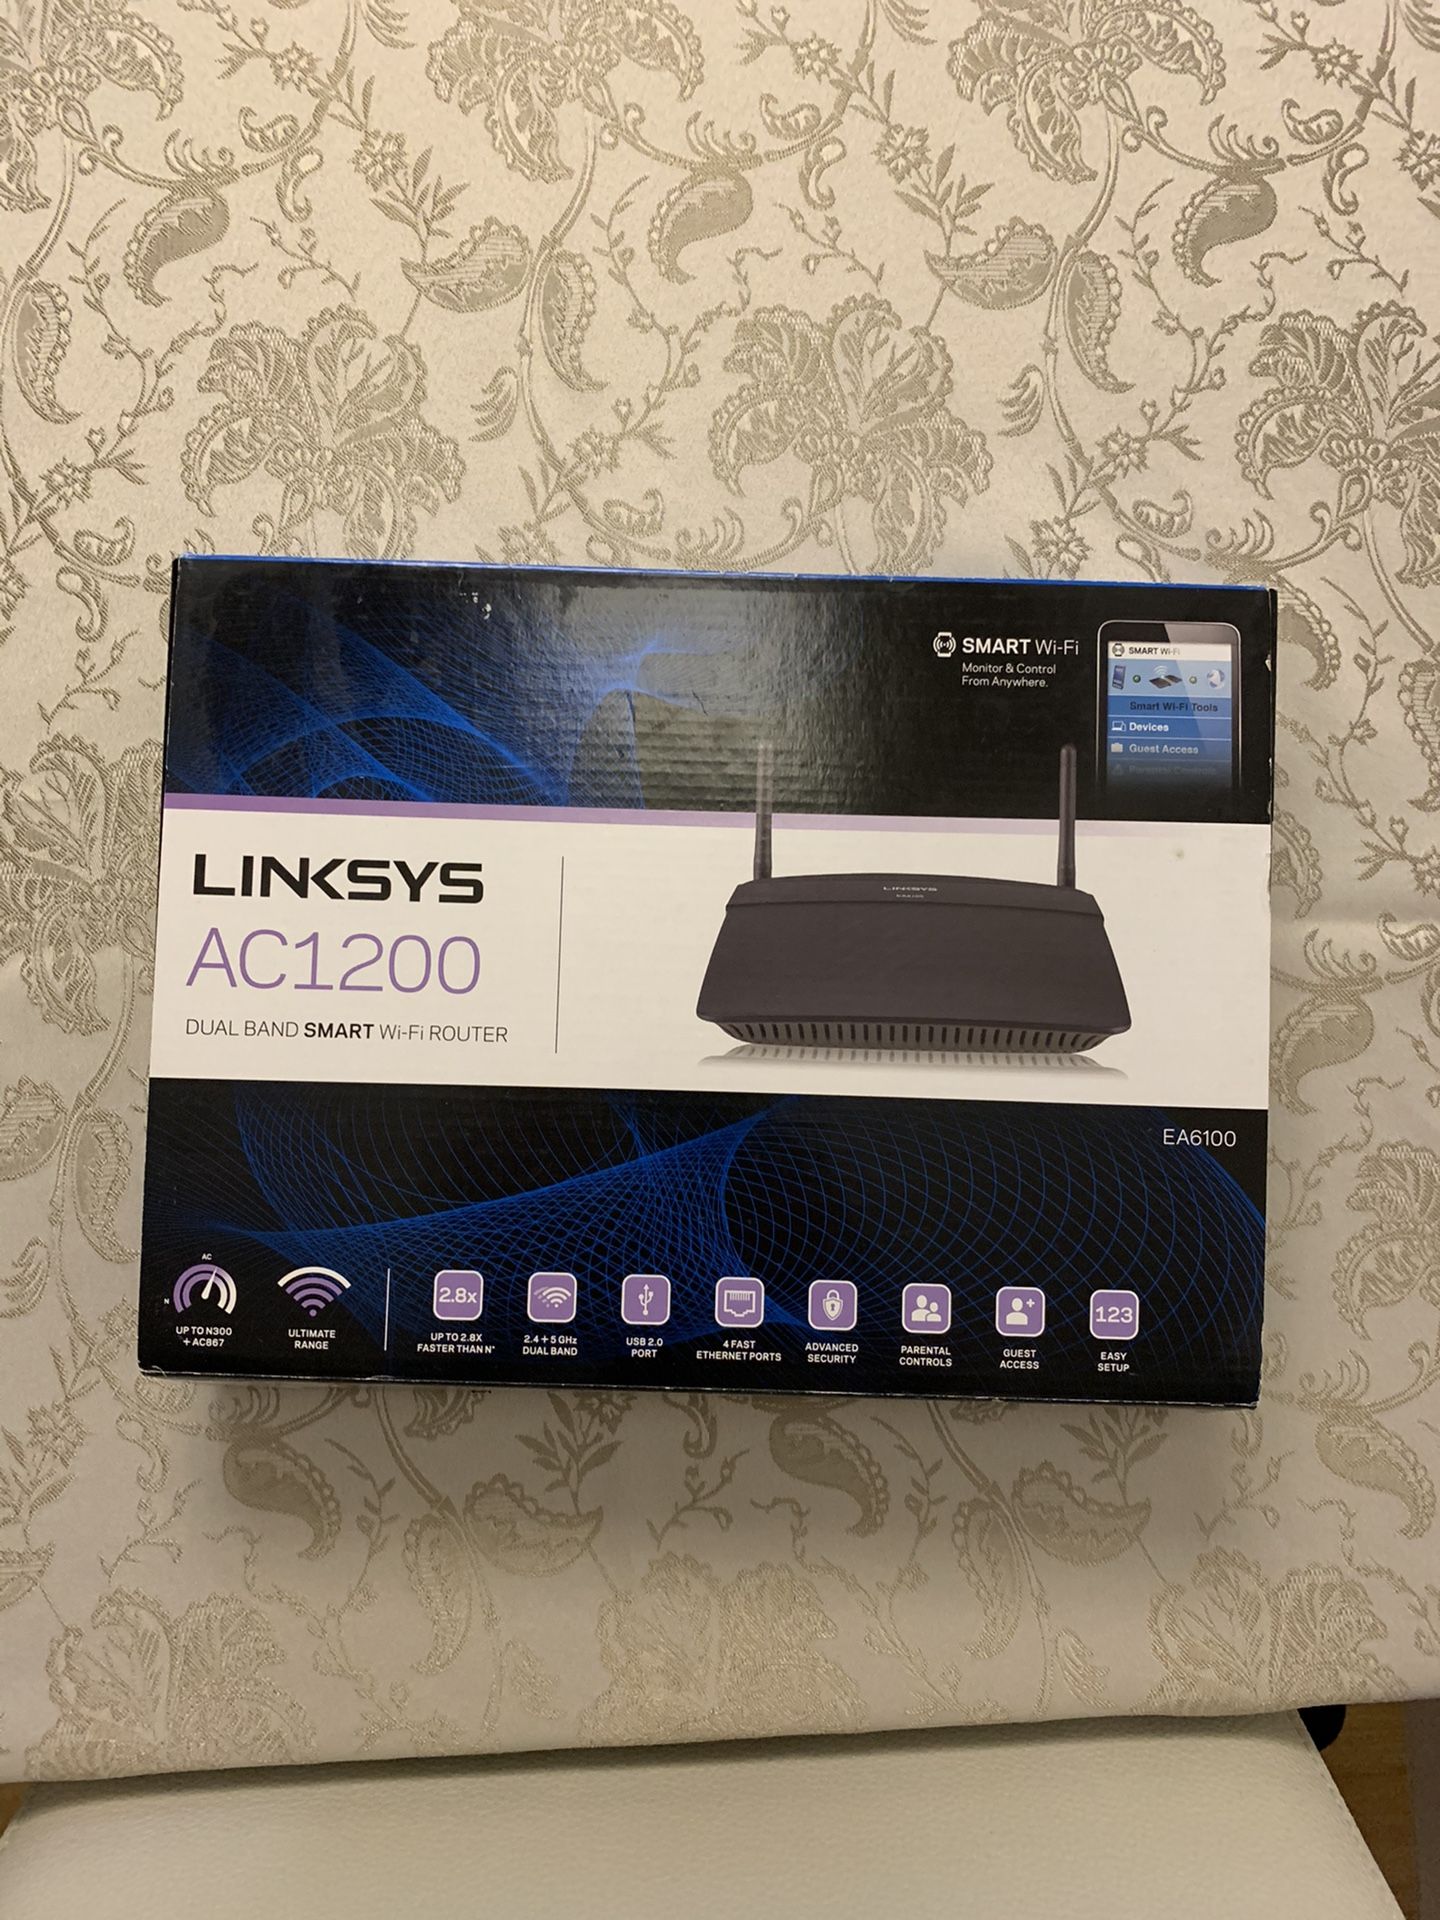 Linksys WiFi Router Dual-Band AC1200 like new